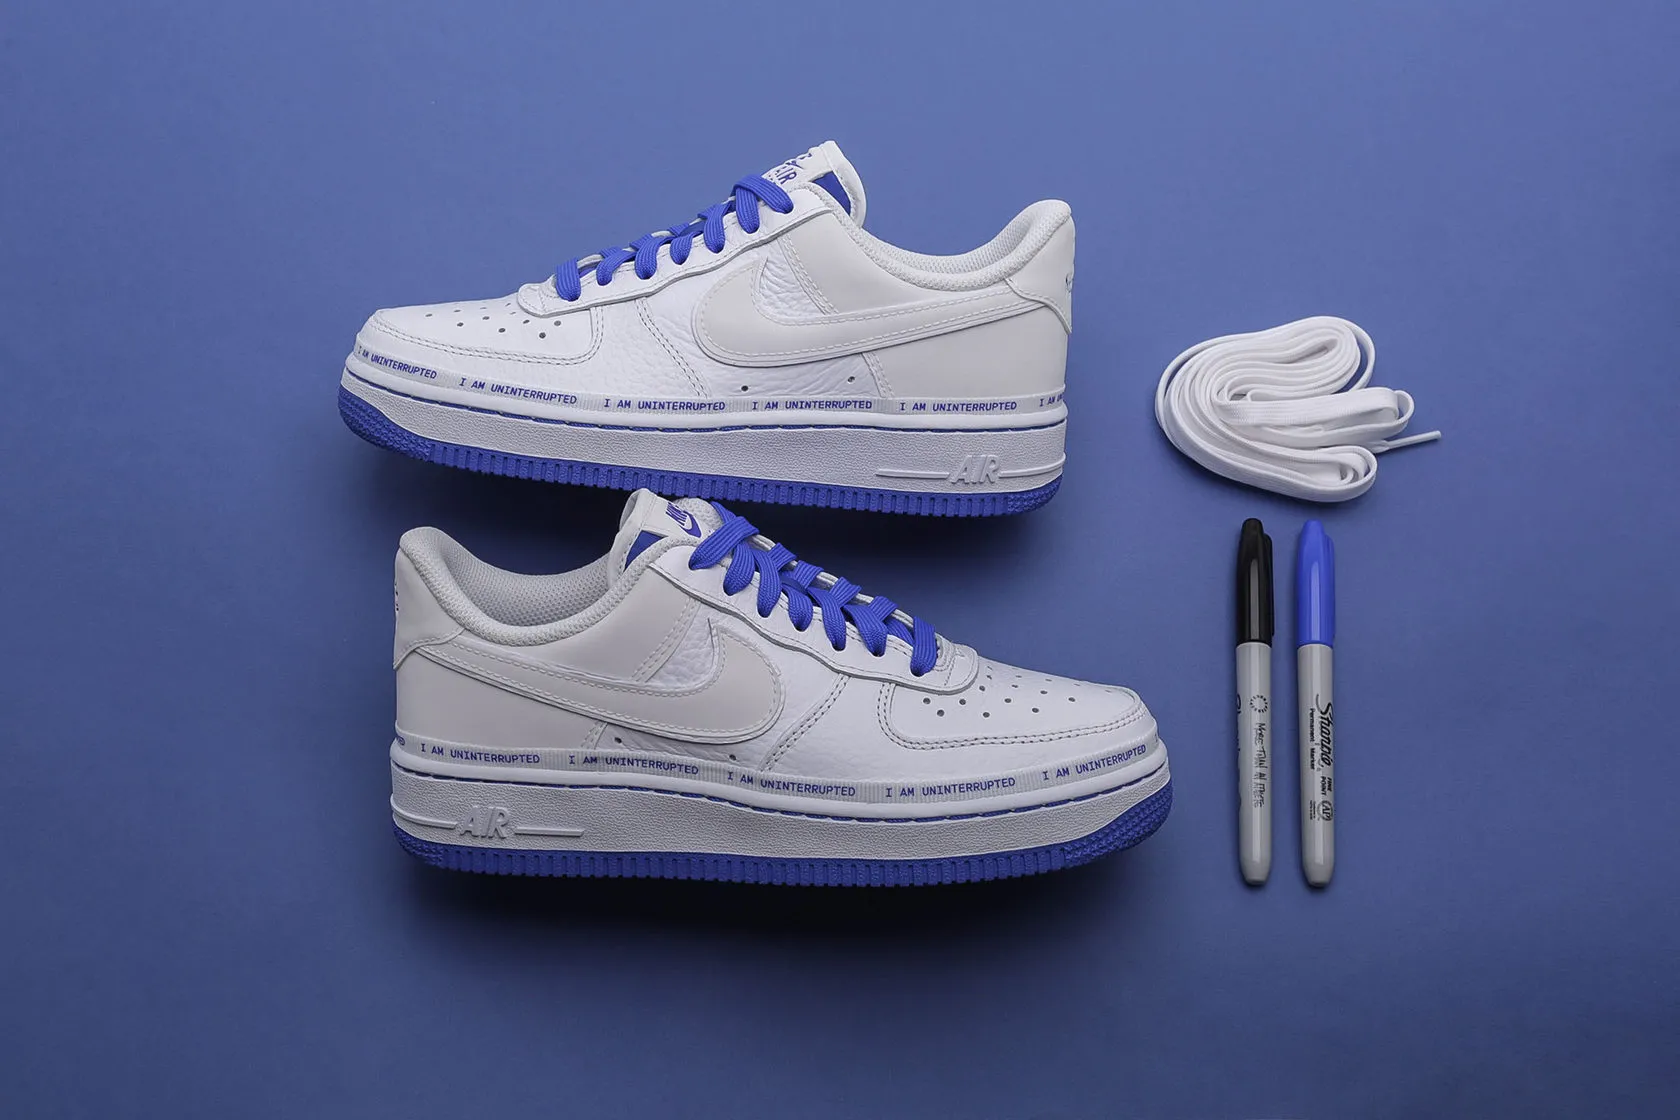 uninterrupted air force 1